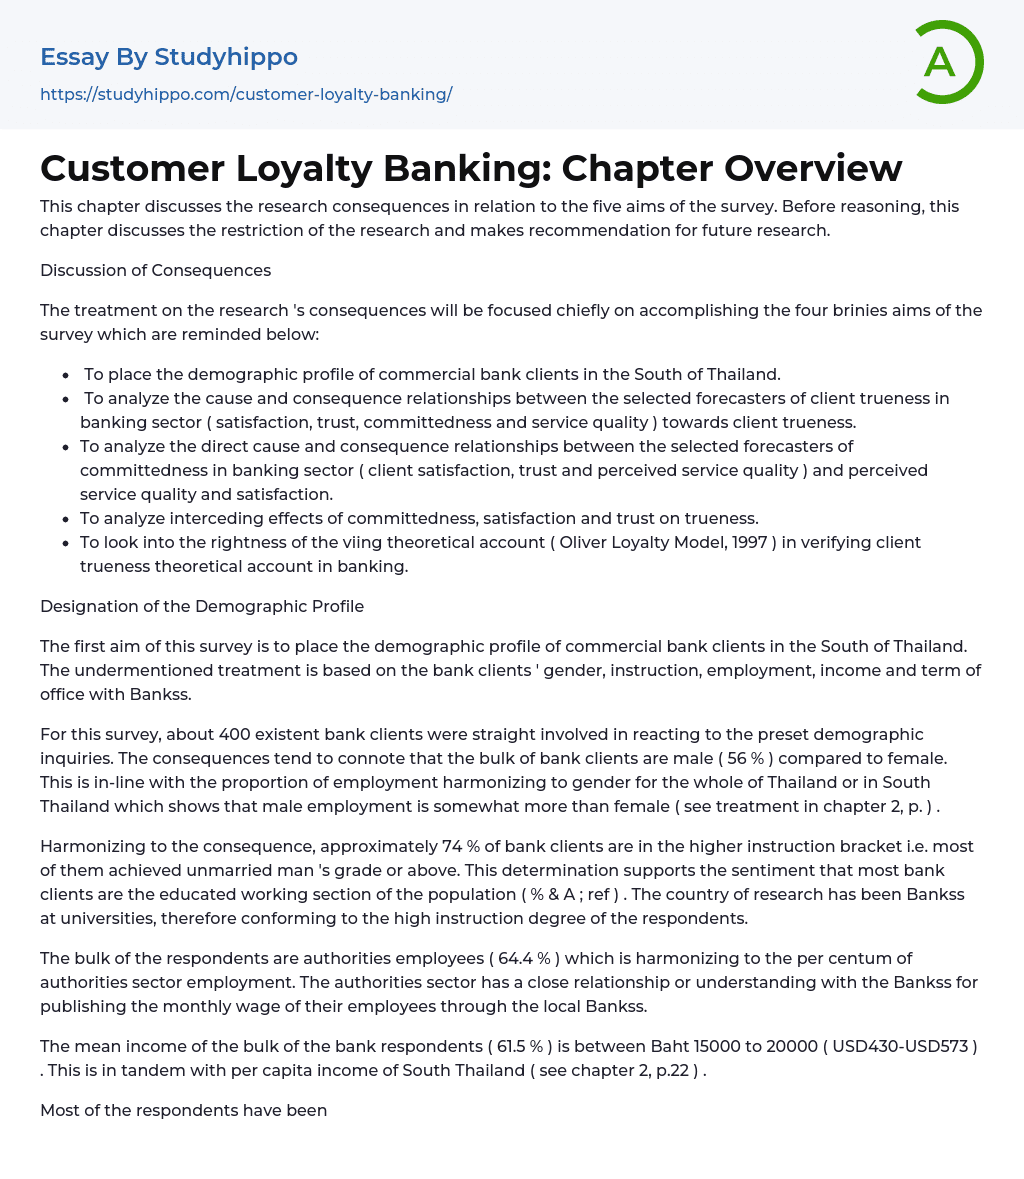 Customer Loyalty Banking: Chapter Overview Essay Example